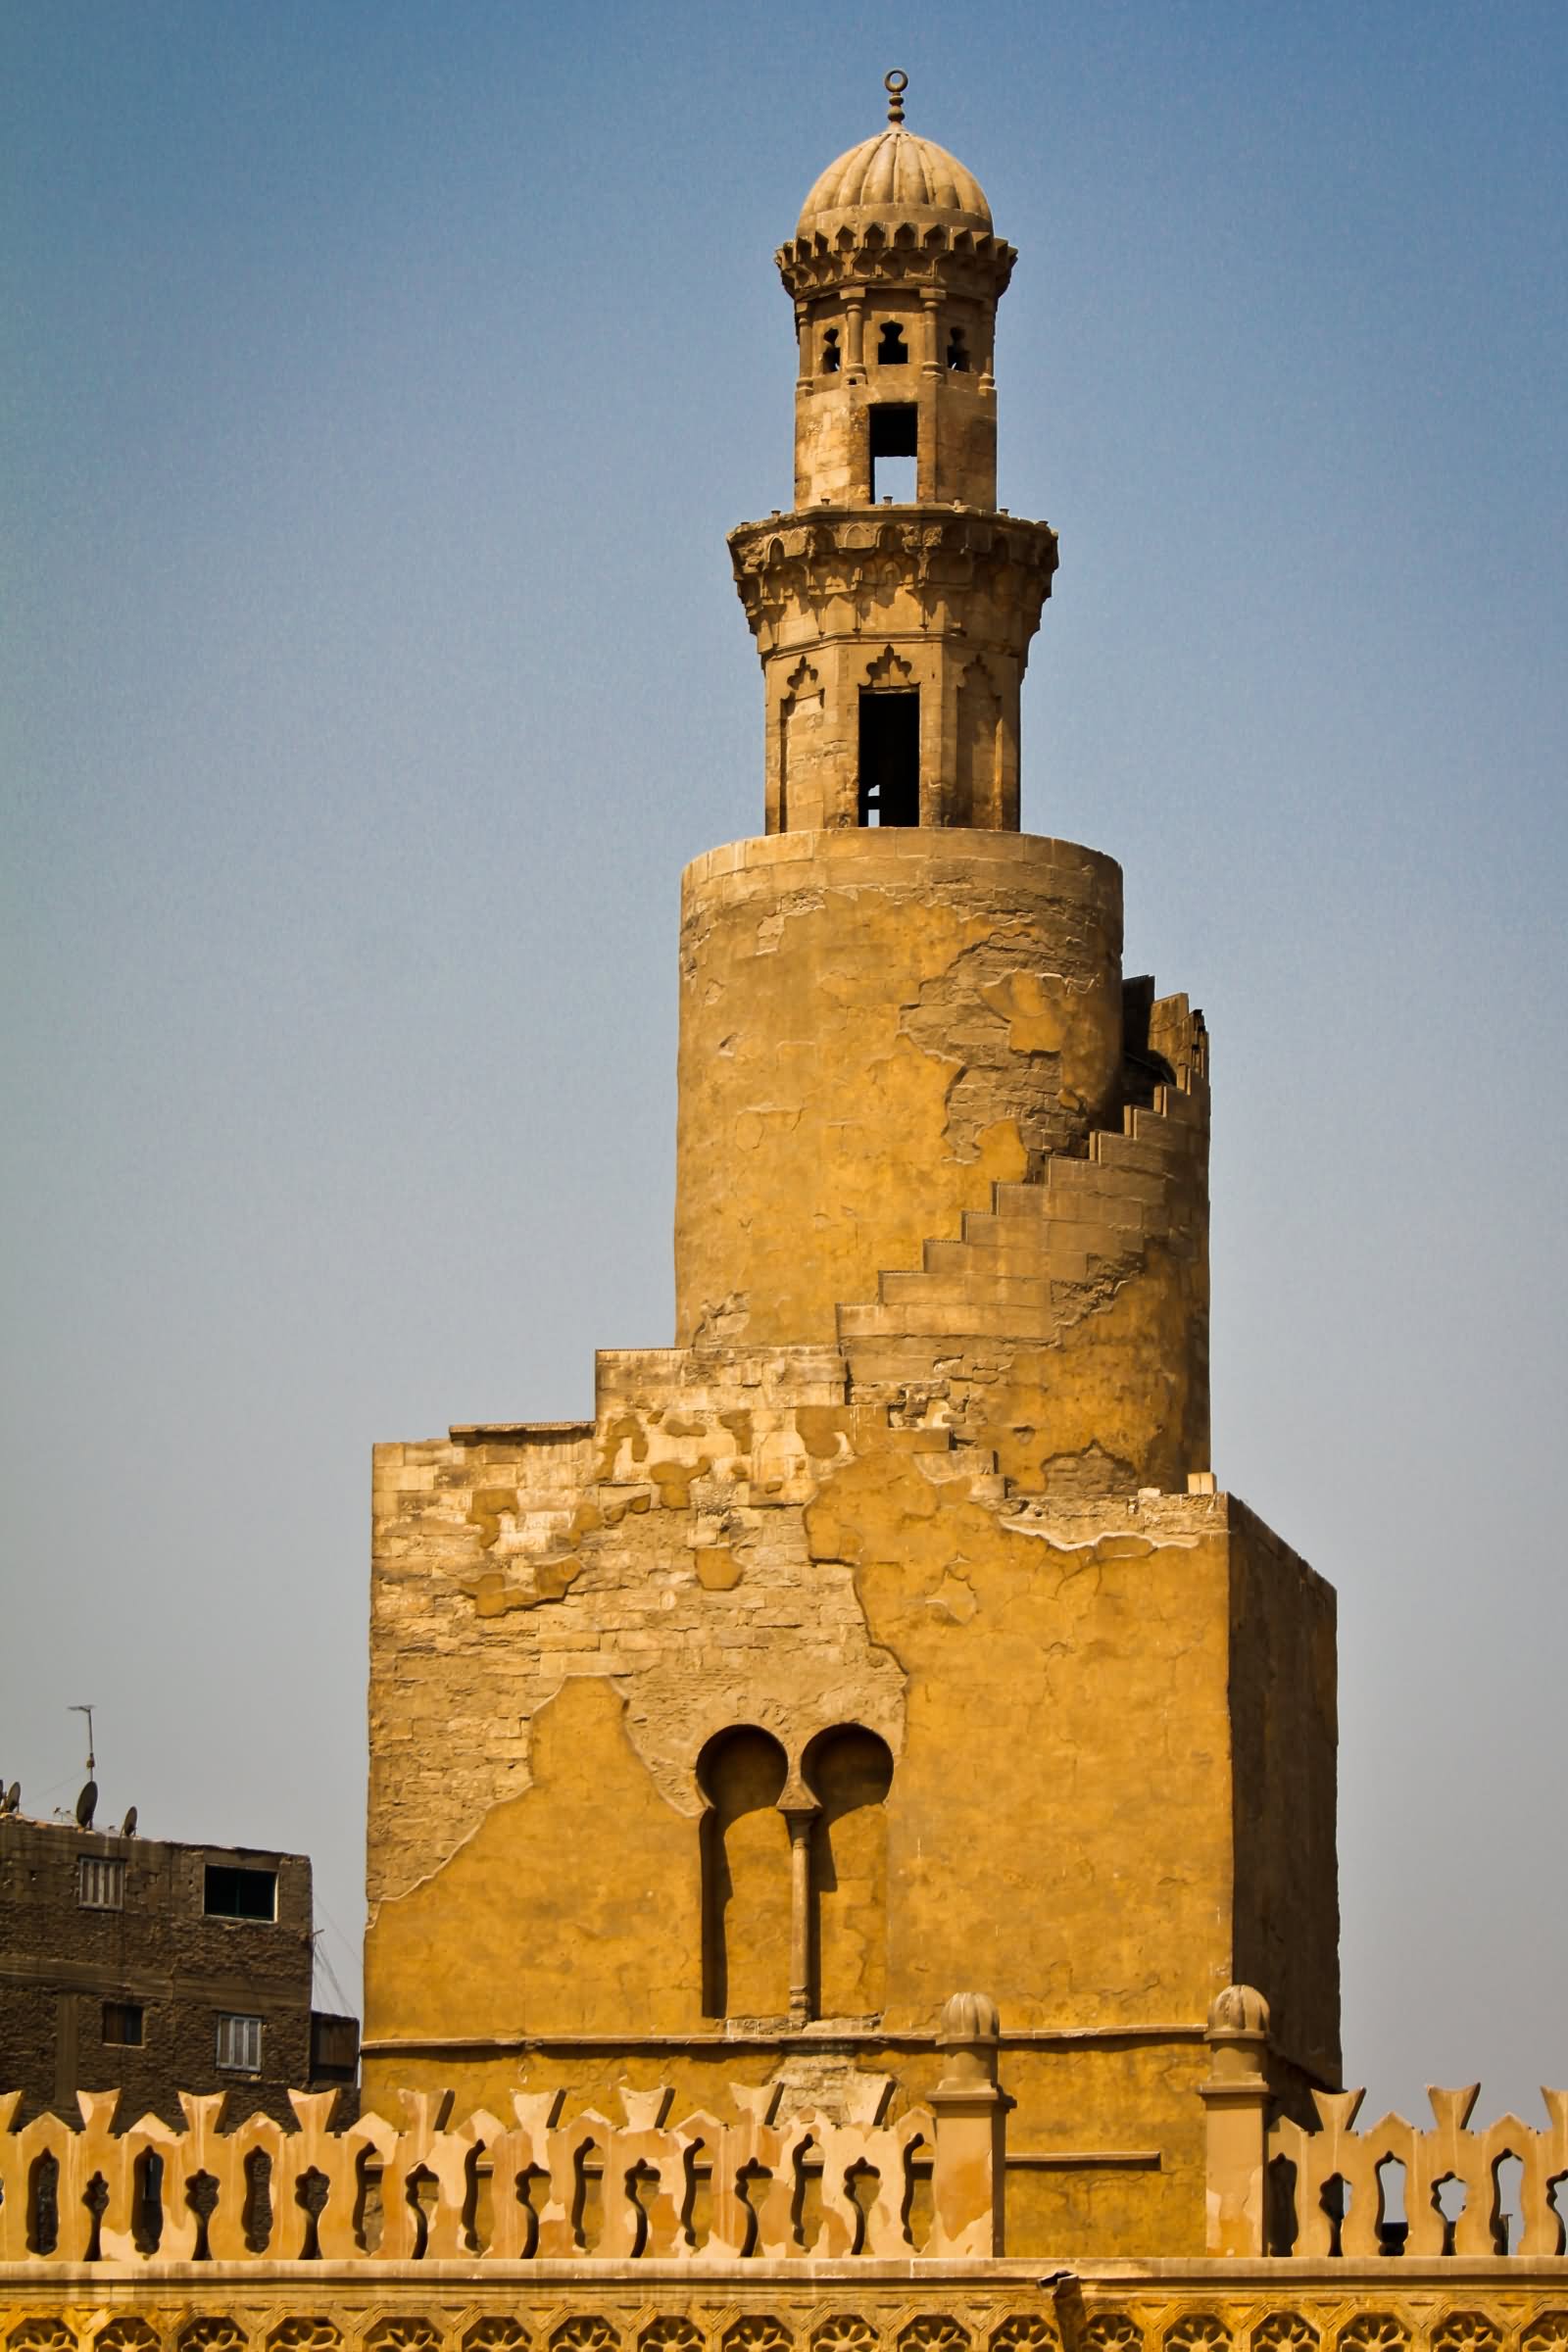 Beautiful Picture Of The Spiral Minaret Of Ibn Tulun Mosque